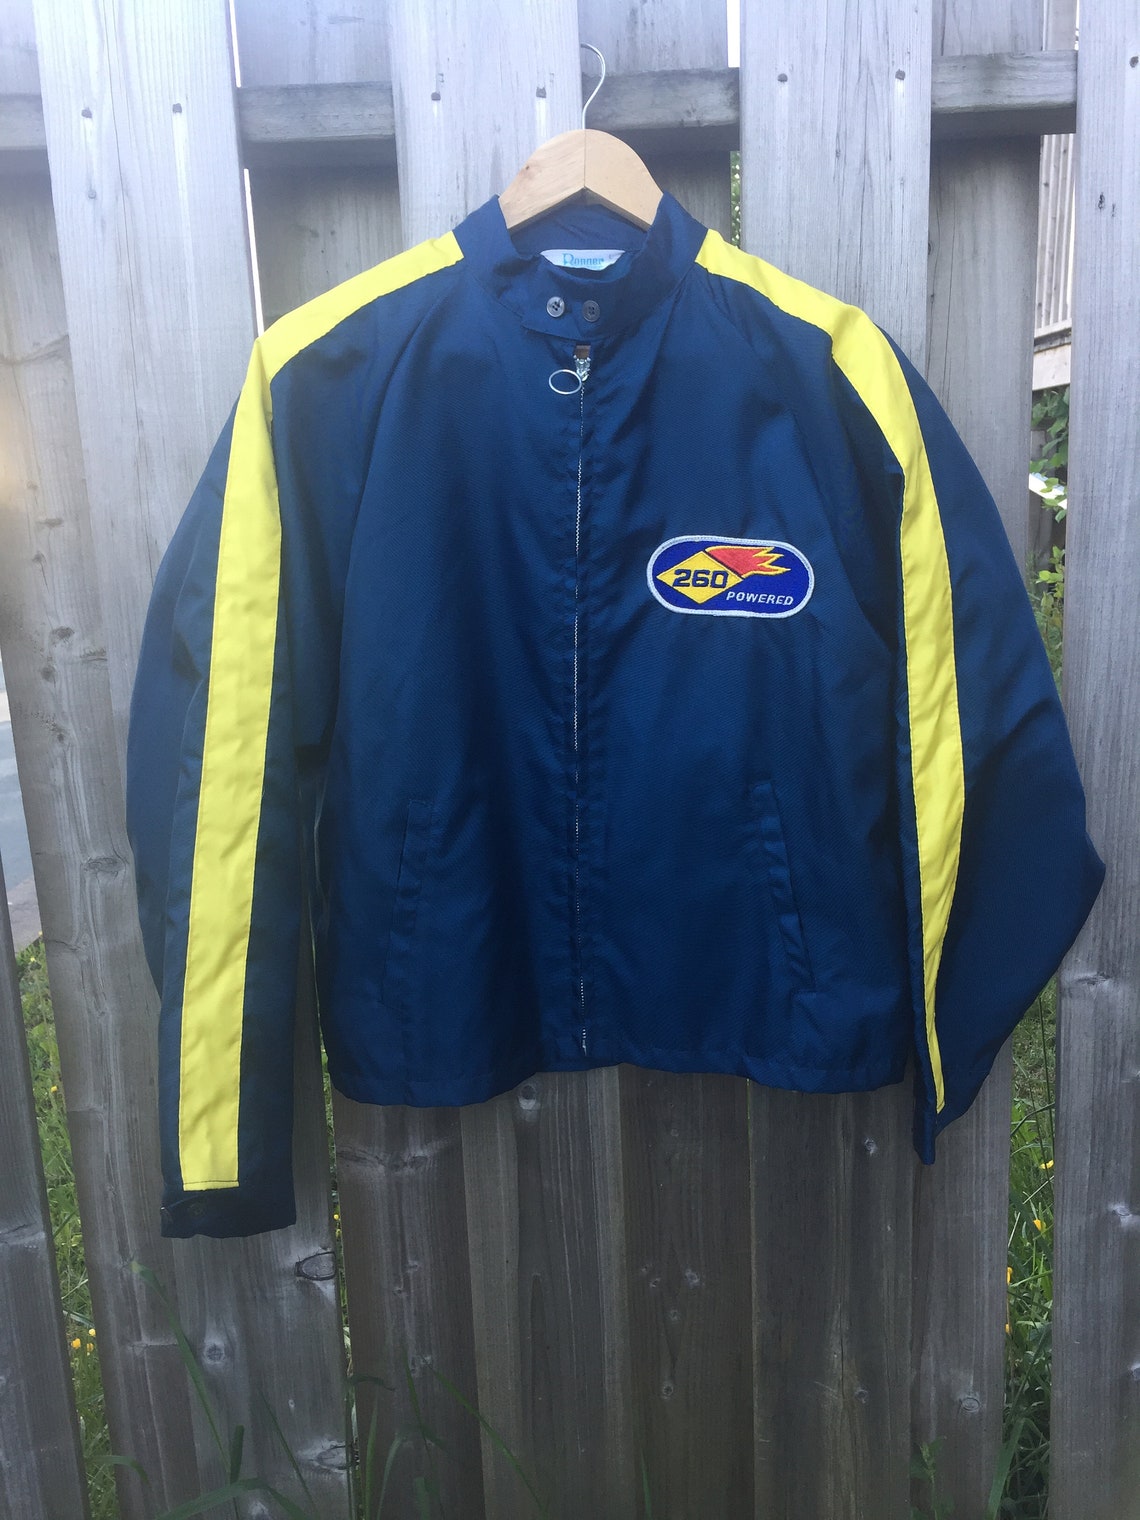 Vintage Retro Sportswear Jacket With Racing Patch Blue With - Etsy